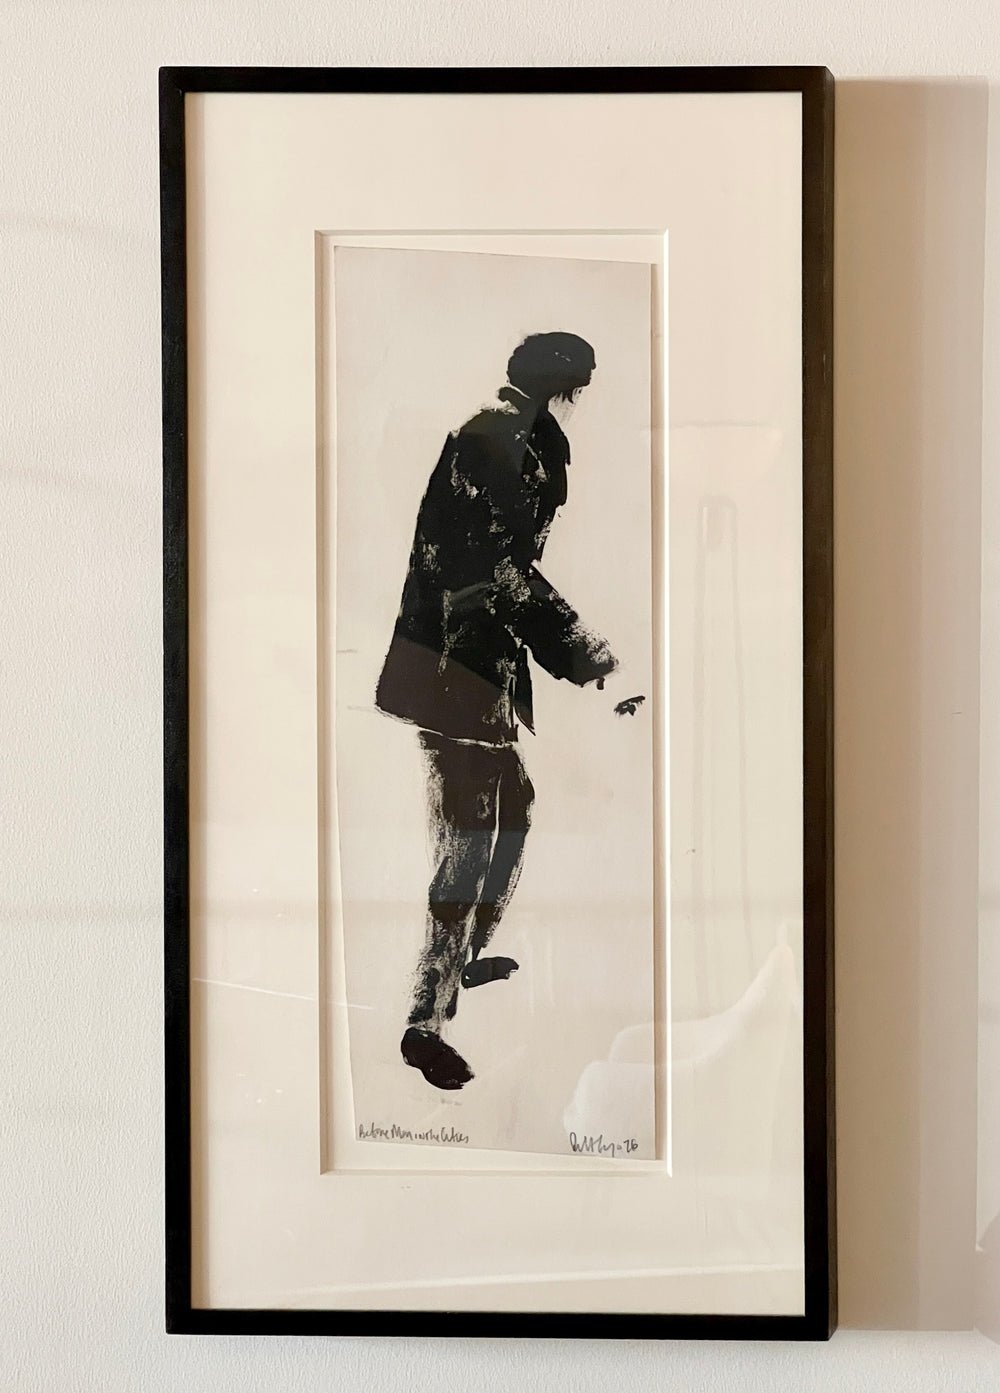 Robert Longo stunning framed monotype titled "Before Men in the Cities" signed and dated 1976